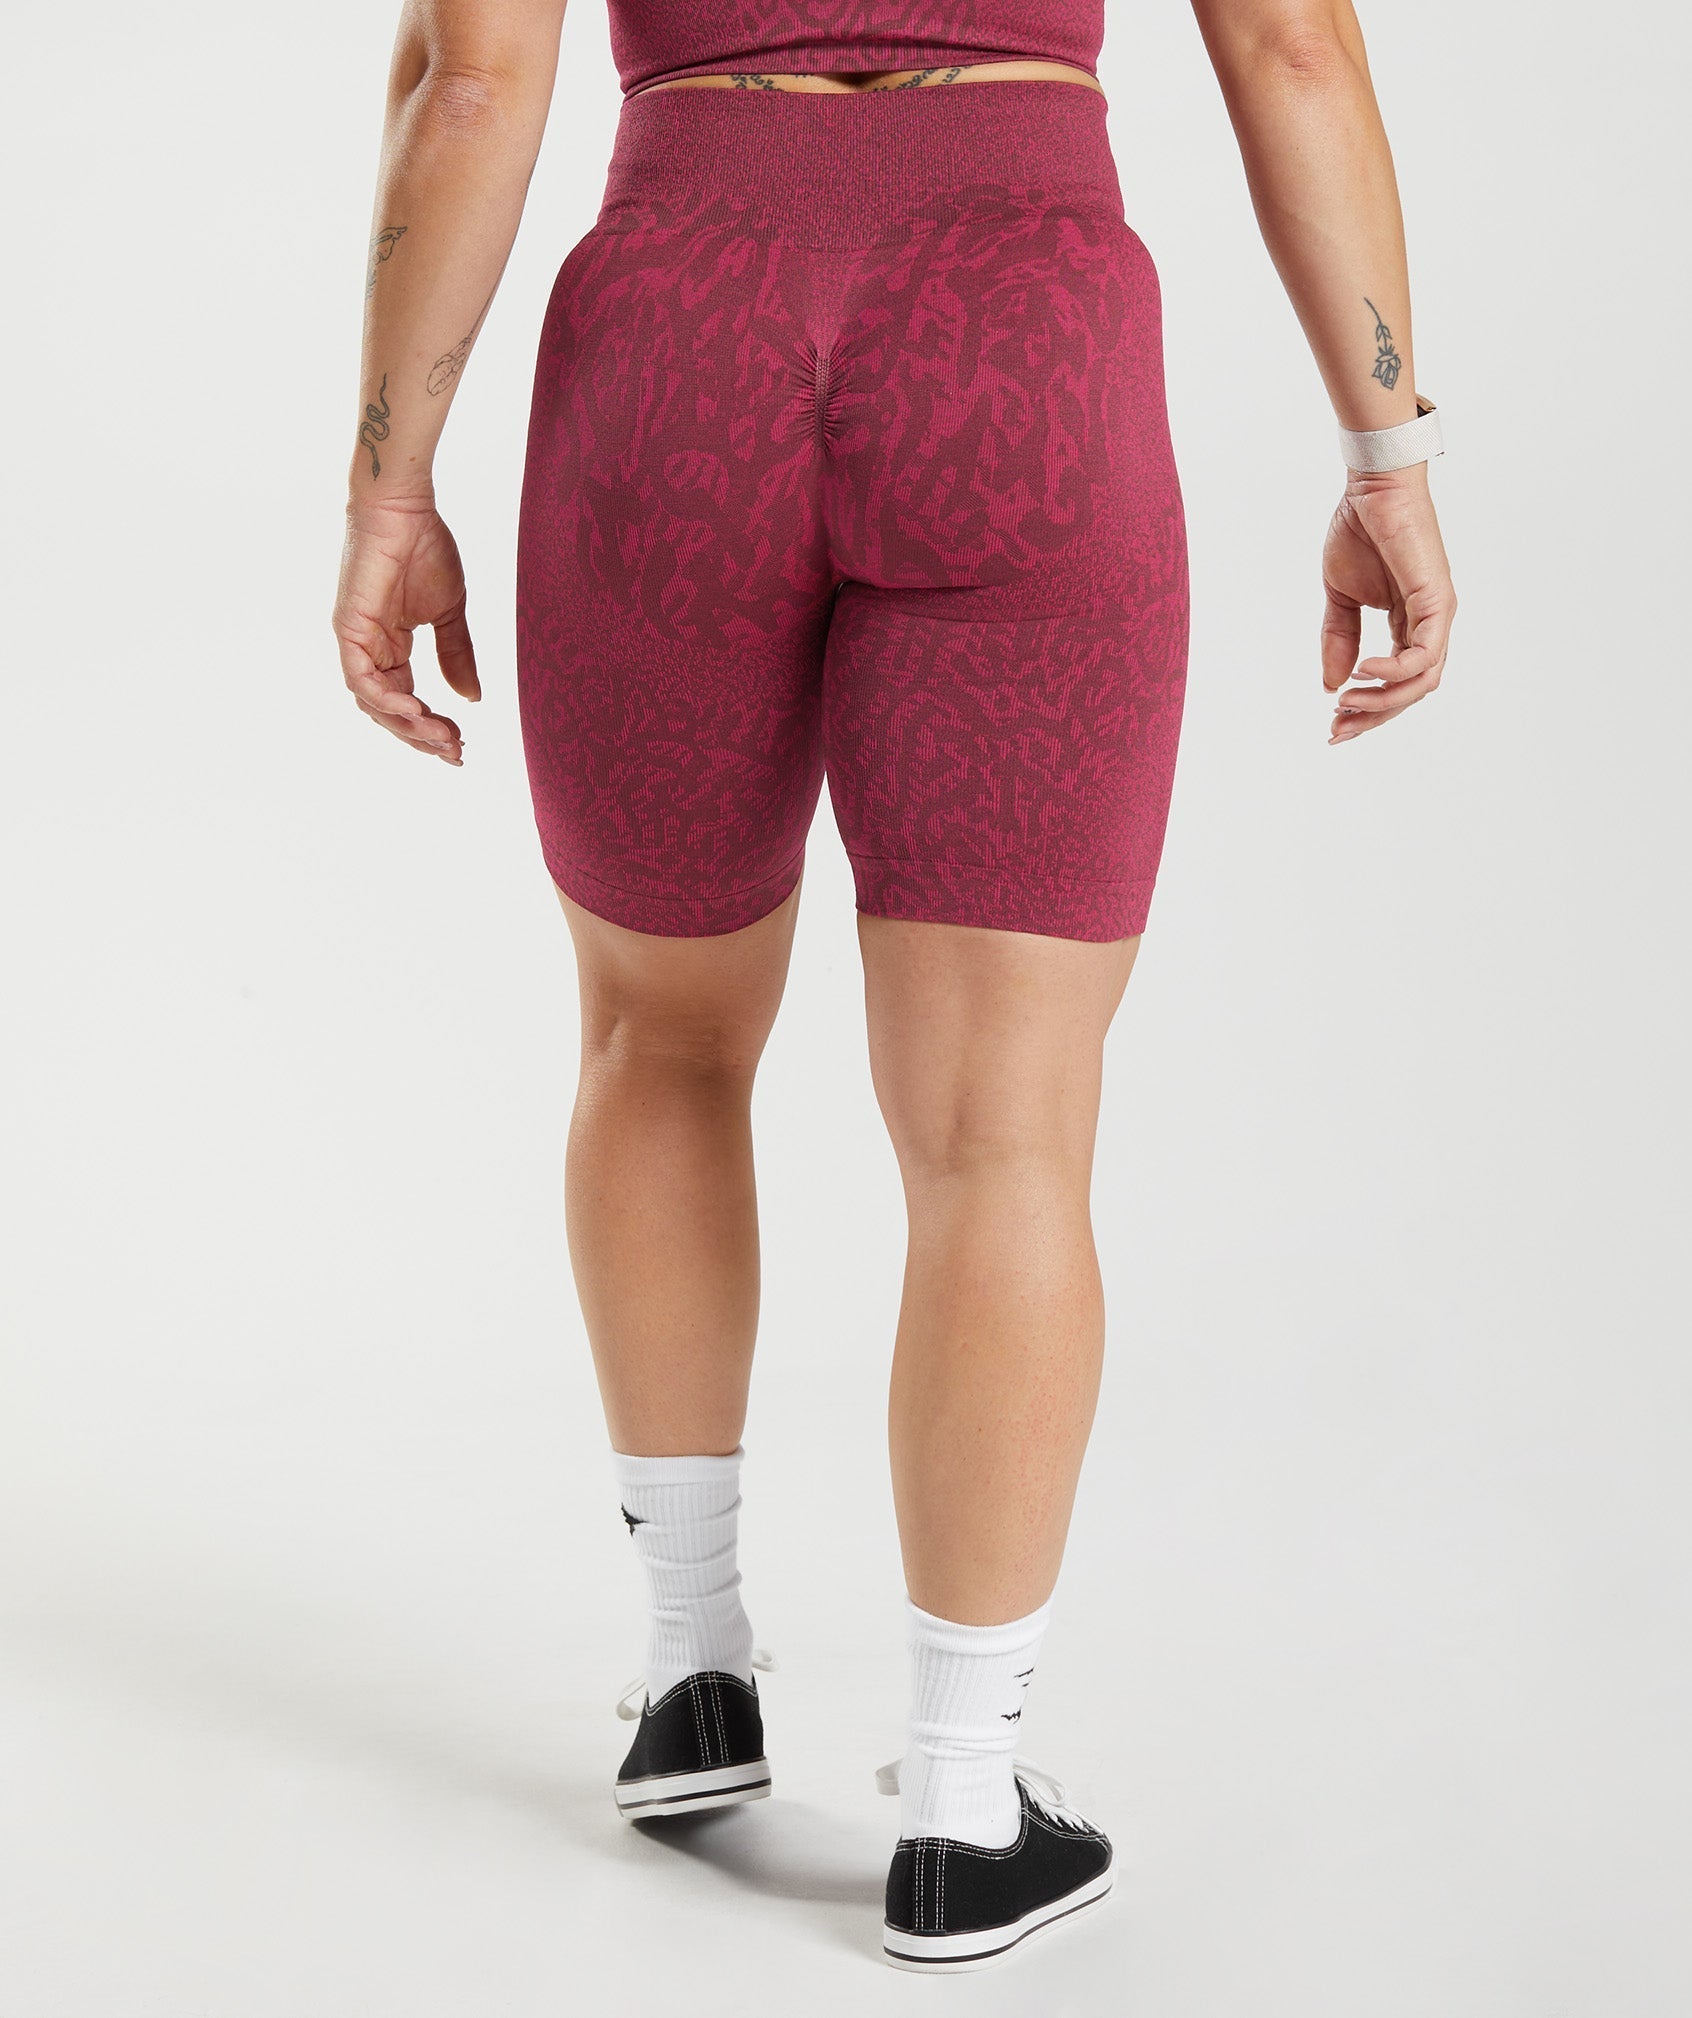 EVERYTHING MUST GO Gymshark ADAPT OMBRE SEAMLESS - Cycling Shorts - Women's  - burgundy marl/burgundy - Private Sport Shop